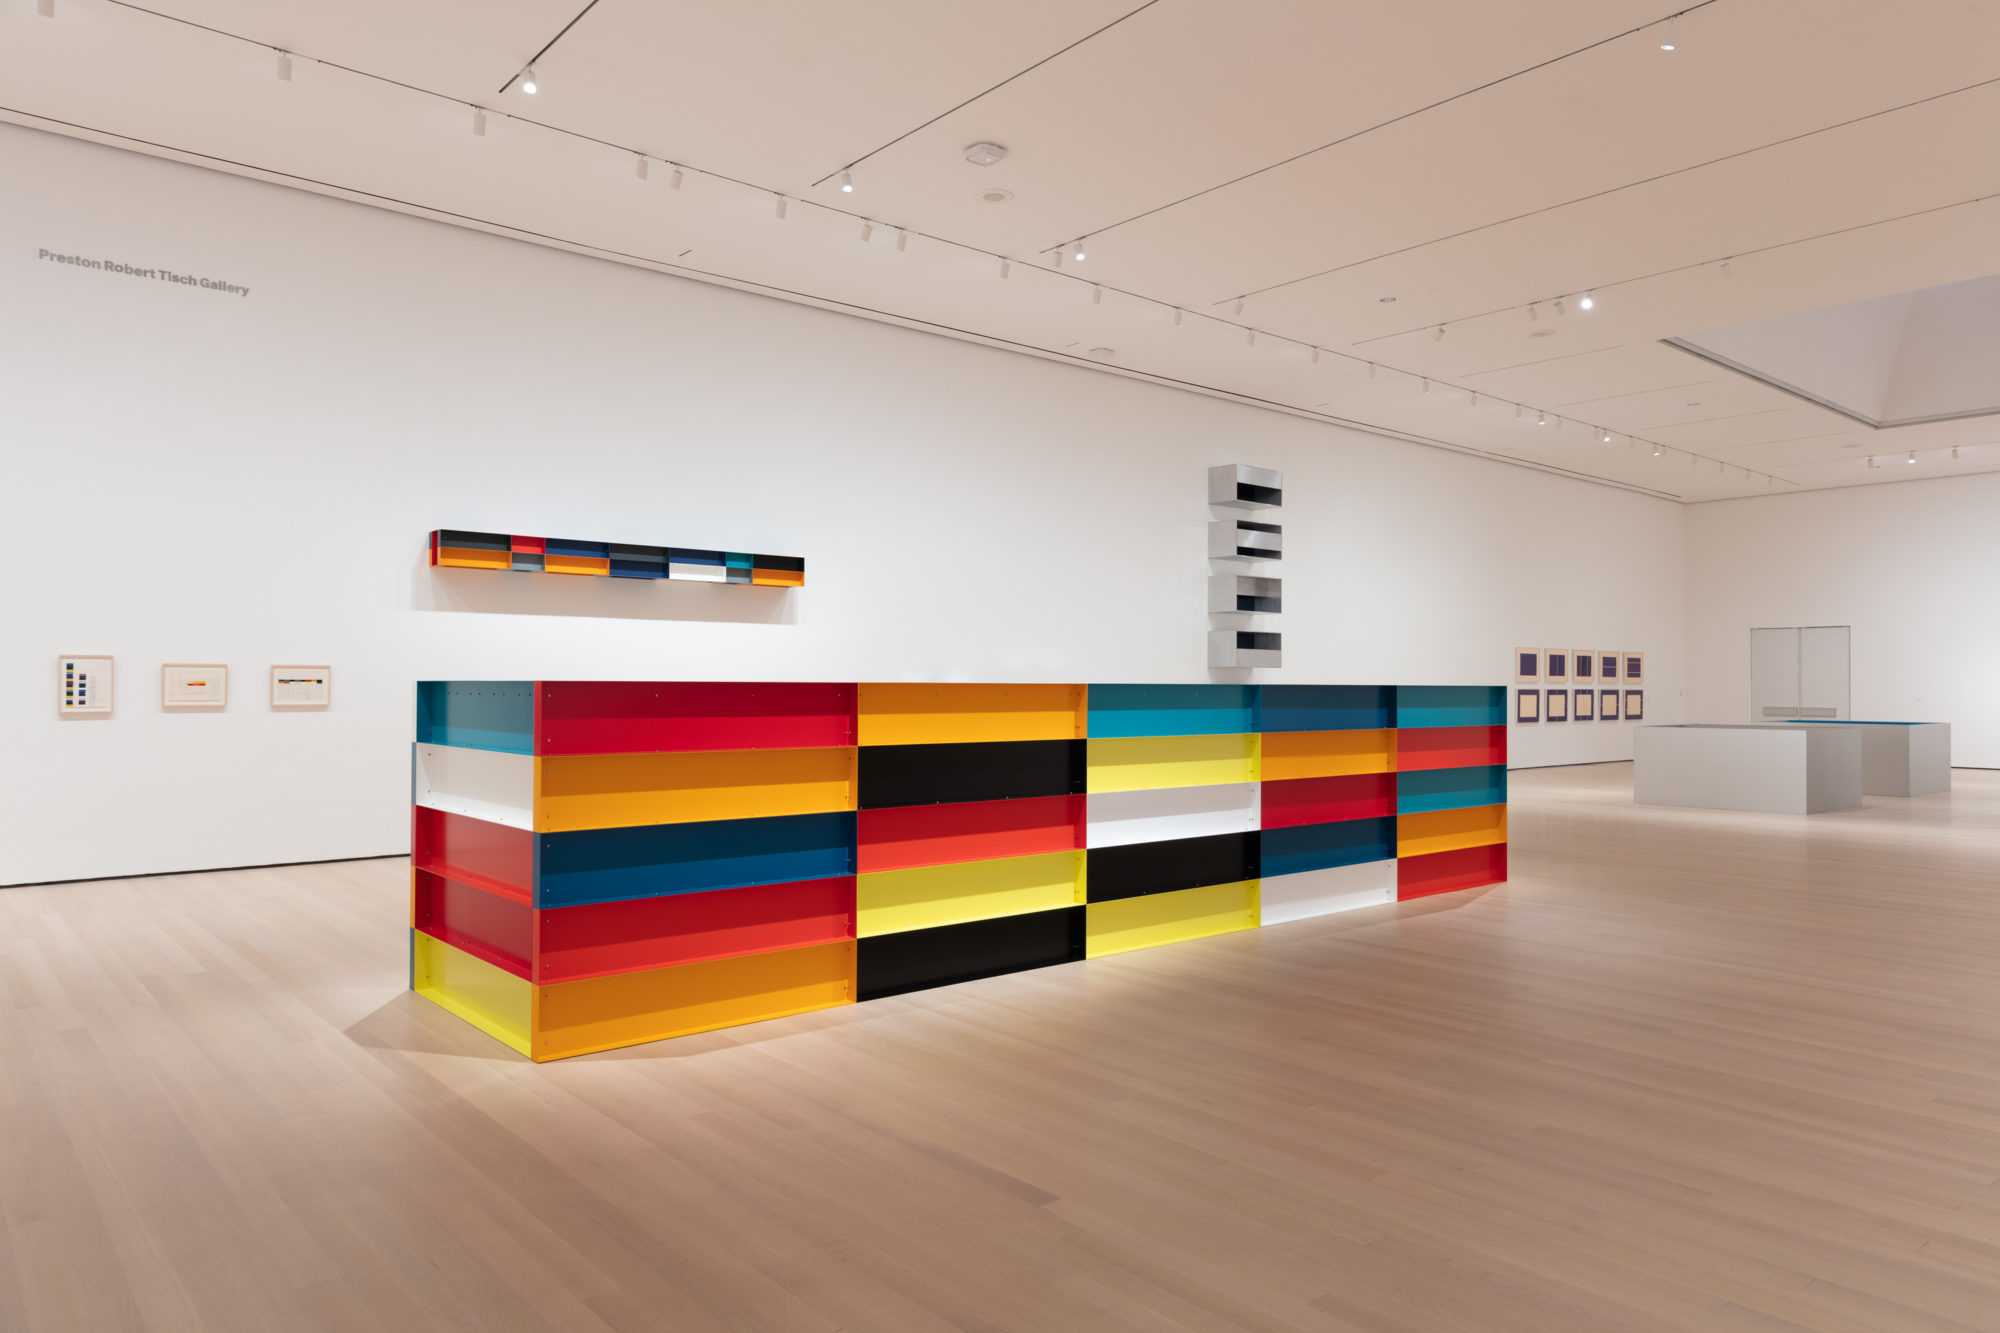 The passion of Donald Judd